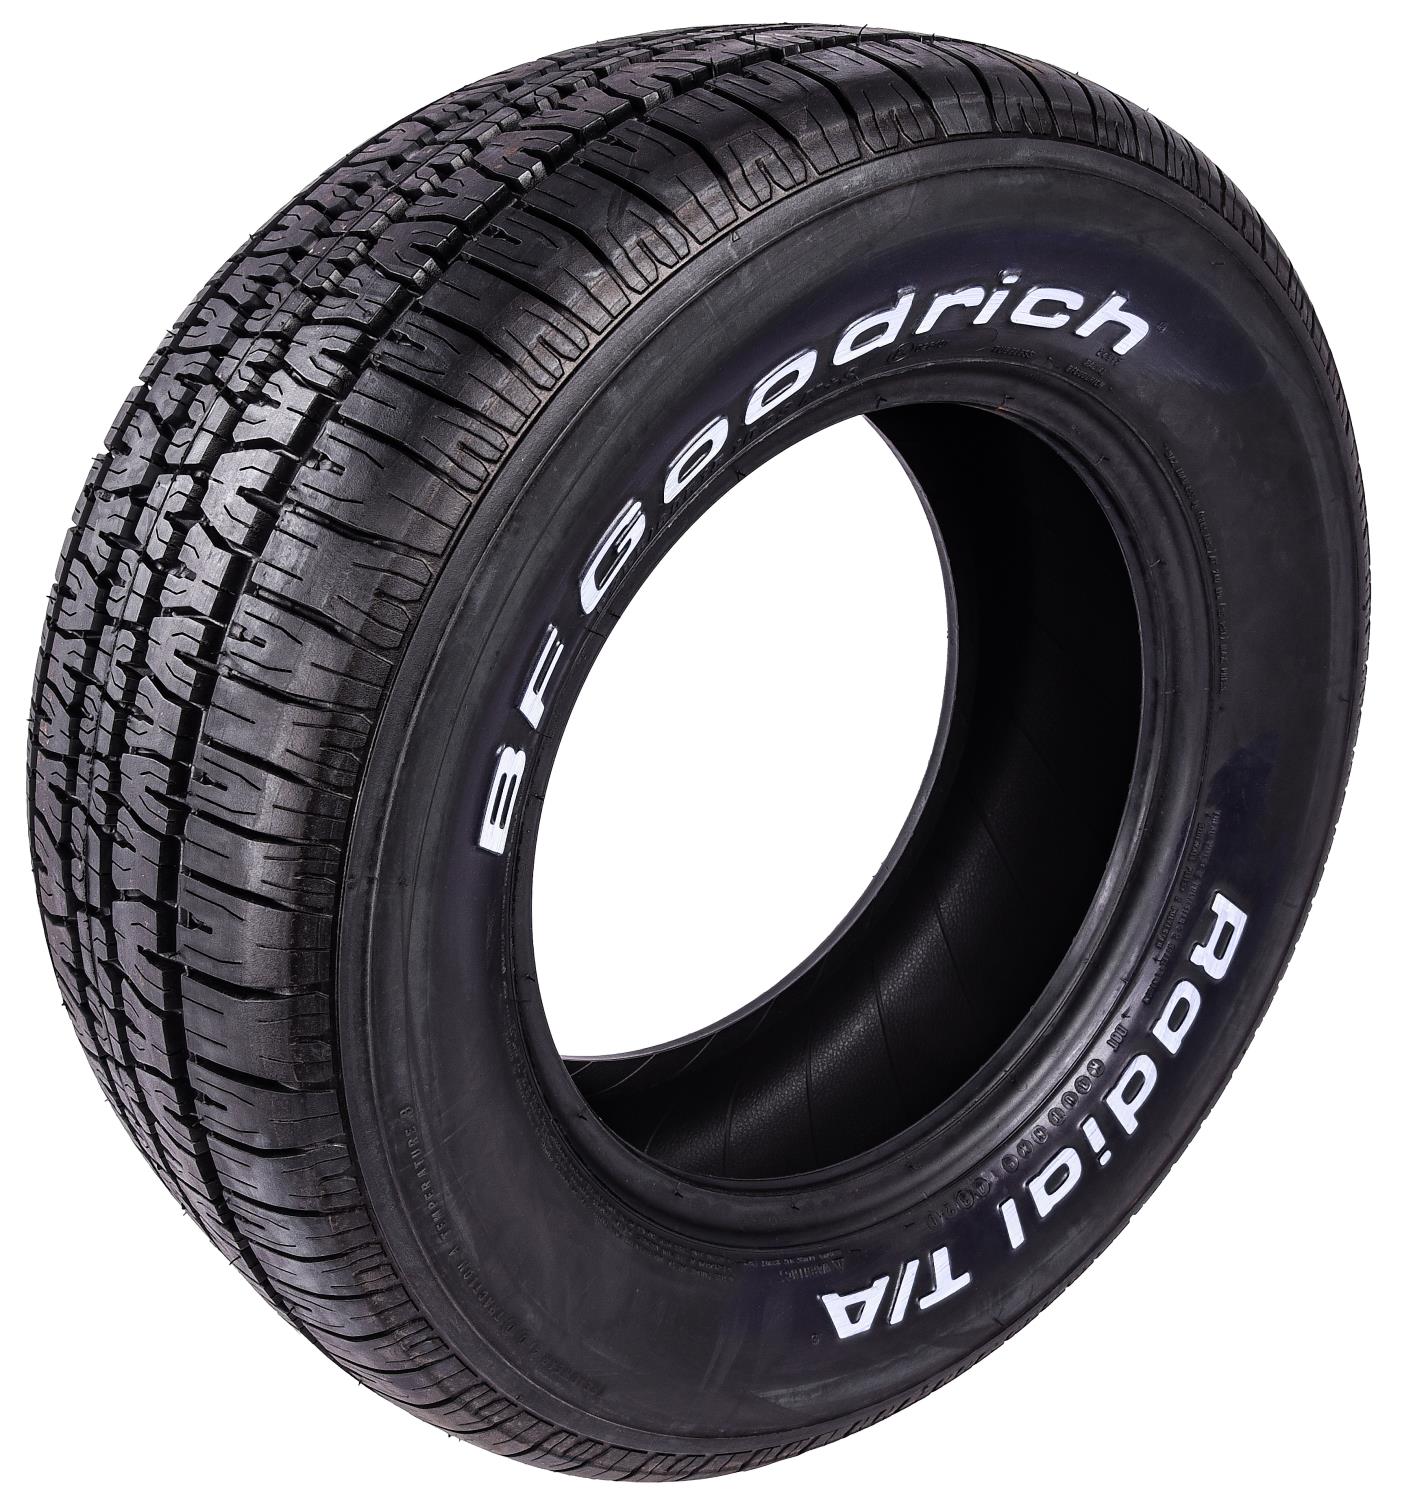 Radial T/A Tire P255/60R15